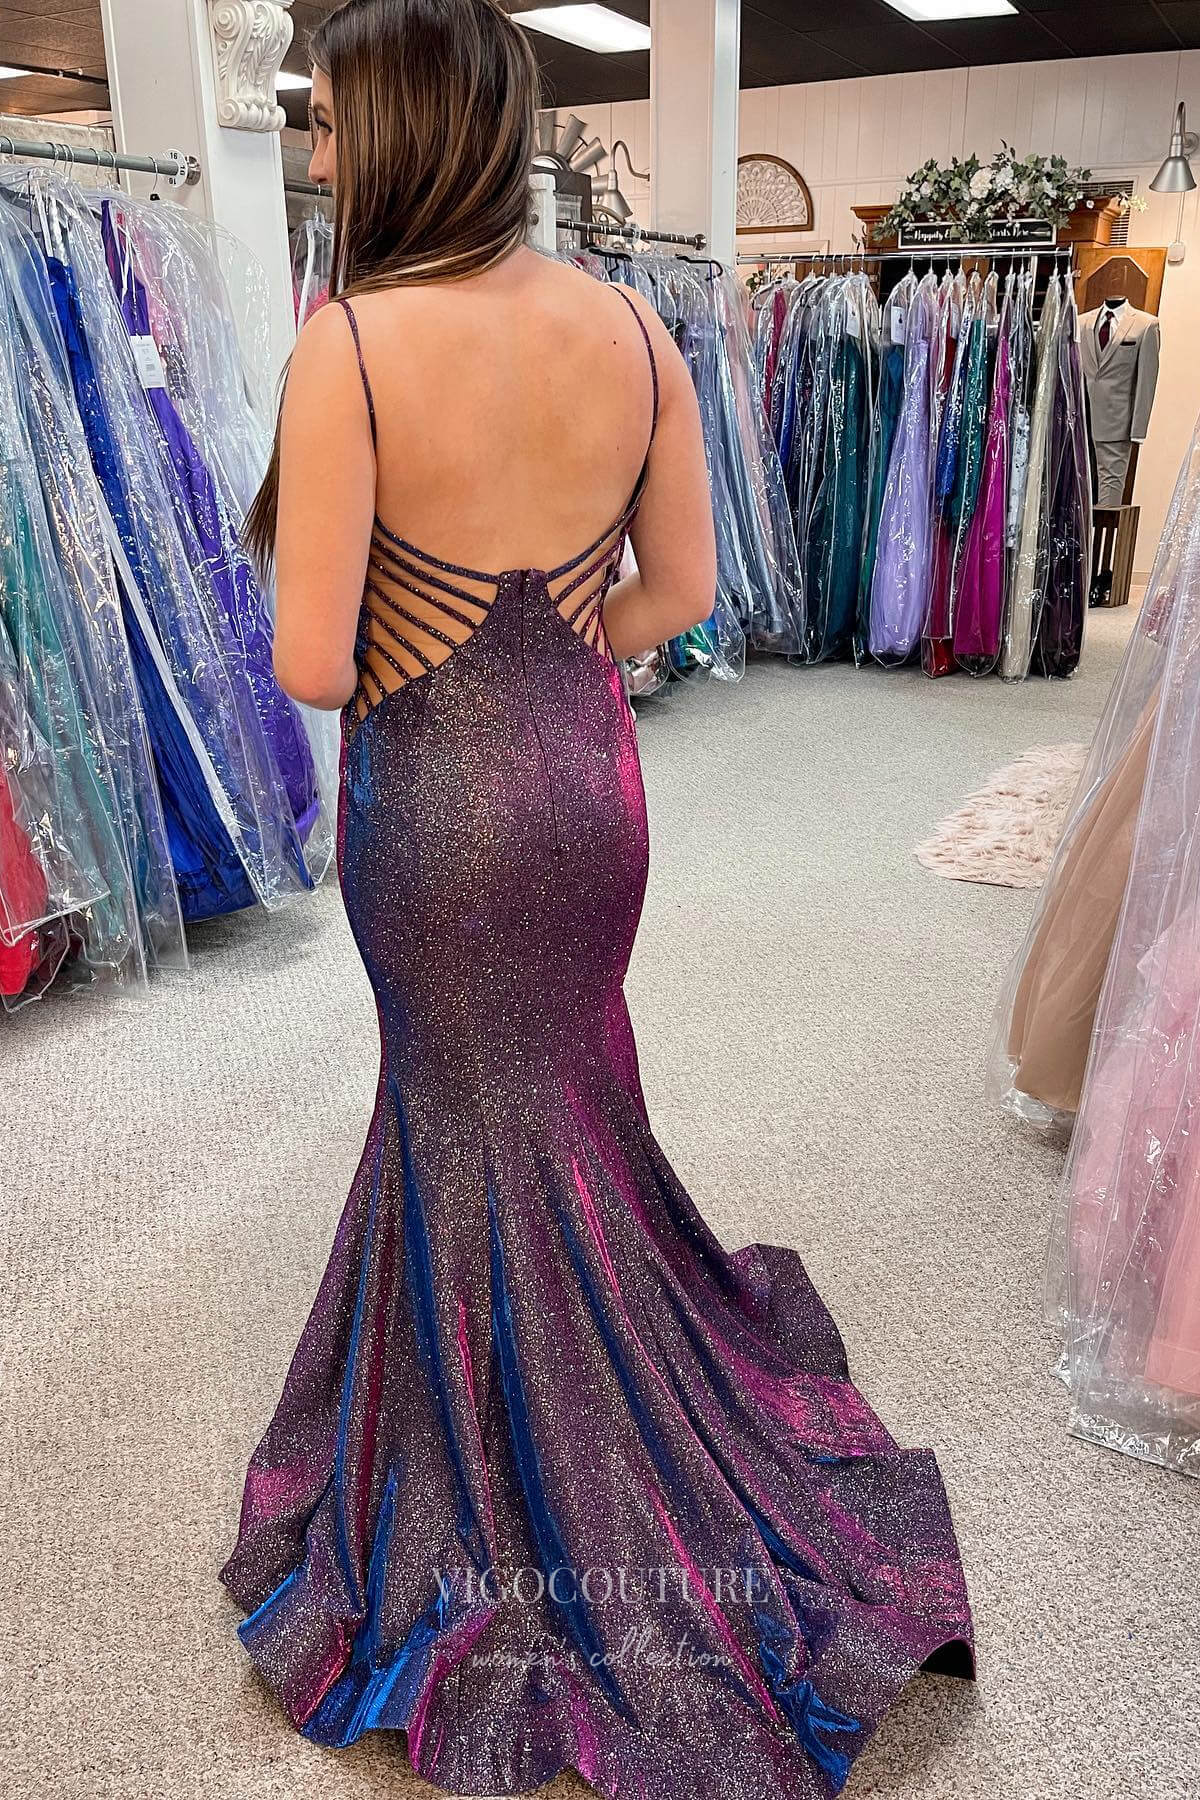 Gorgeous Purple Satin Mermaid Prom Dress with Sparkling Details, Plunging V-Neckline, and Thigh-High Slit 22204-Prom Dresses-vigocouture-Purple-US2-vigocouture